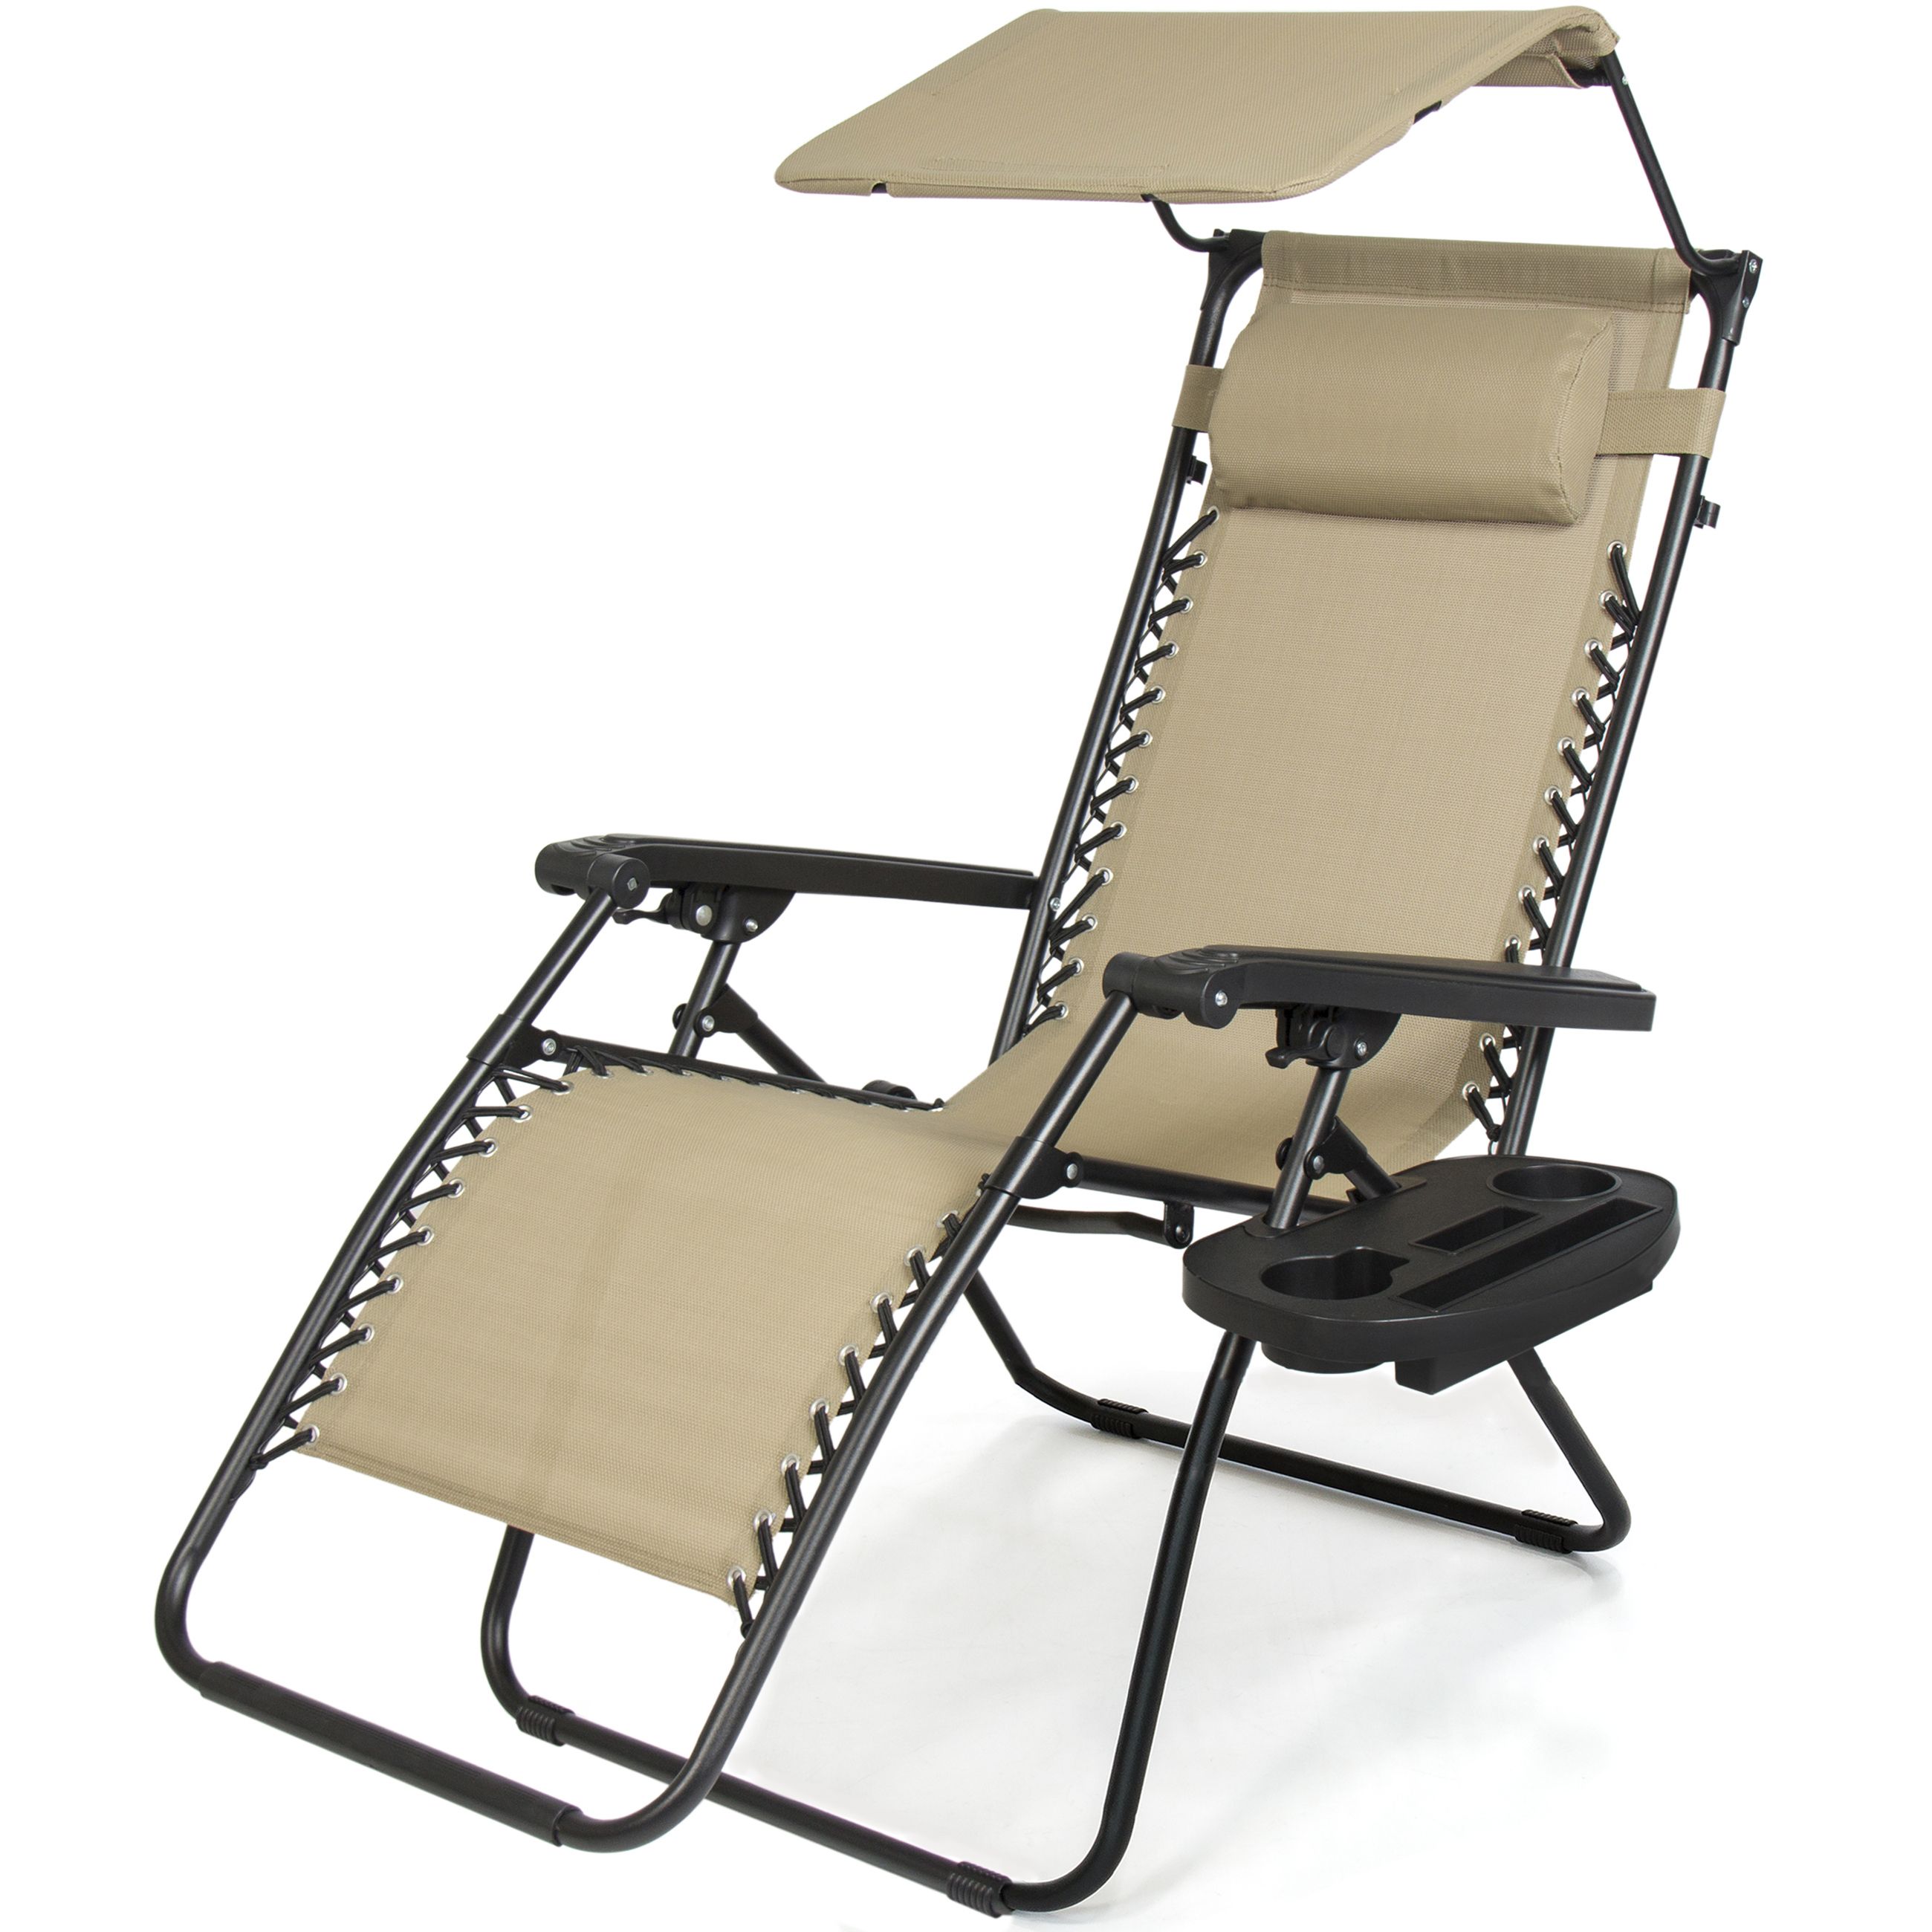 Best Choice Products Folding Steel Mesh Zero Gravity Recliner Lounge Chair  W/ Adjustable Canopy Shade And Cup Holder Accessory Tray, Beige – Pertaining To Most Recent Double Reclining Lounge Chairs With Canopy (View 5 of 25)